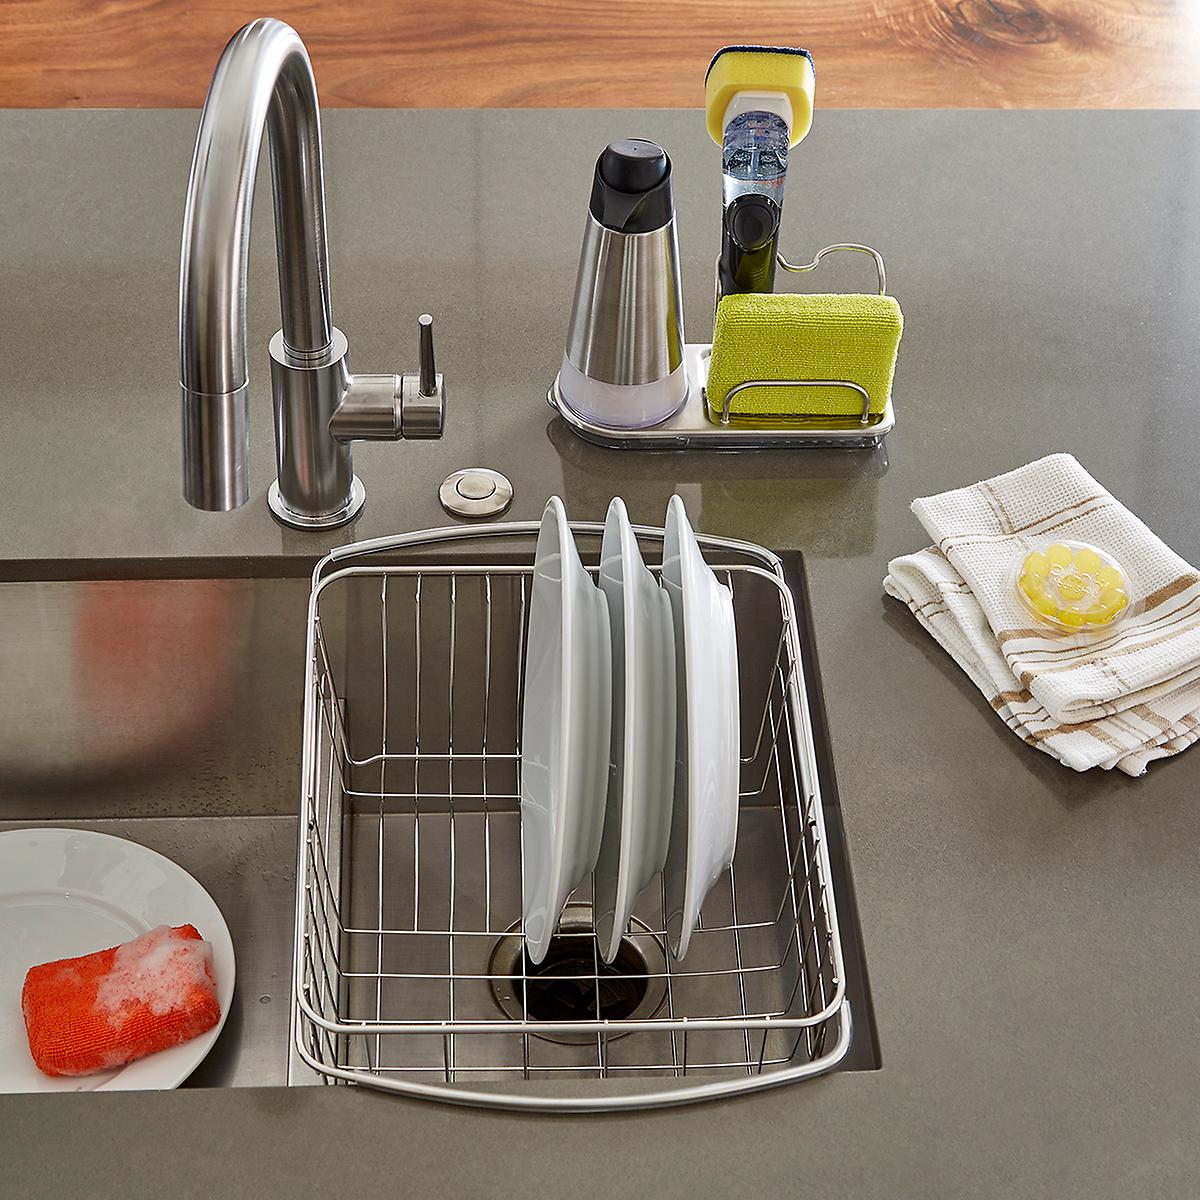 OXO Stainless Steel Sink Organizer The Container Store